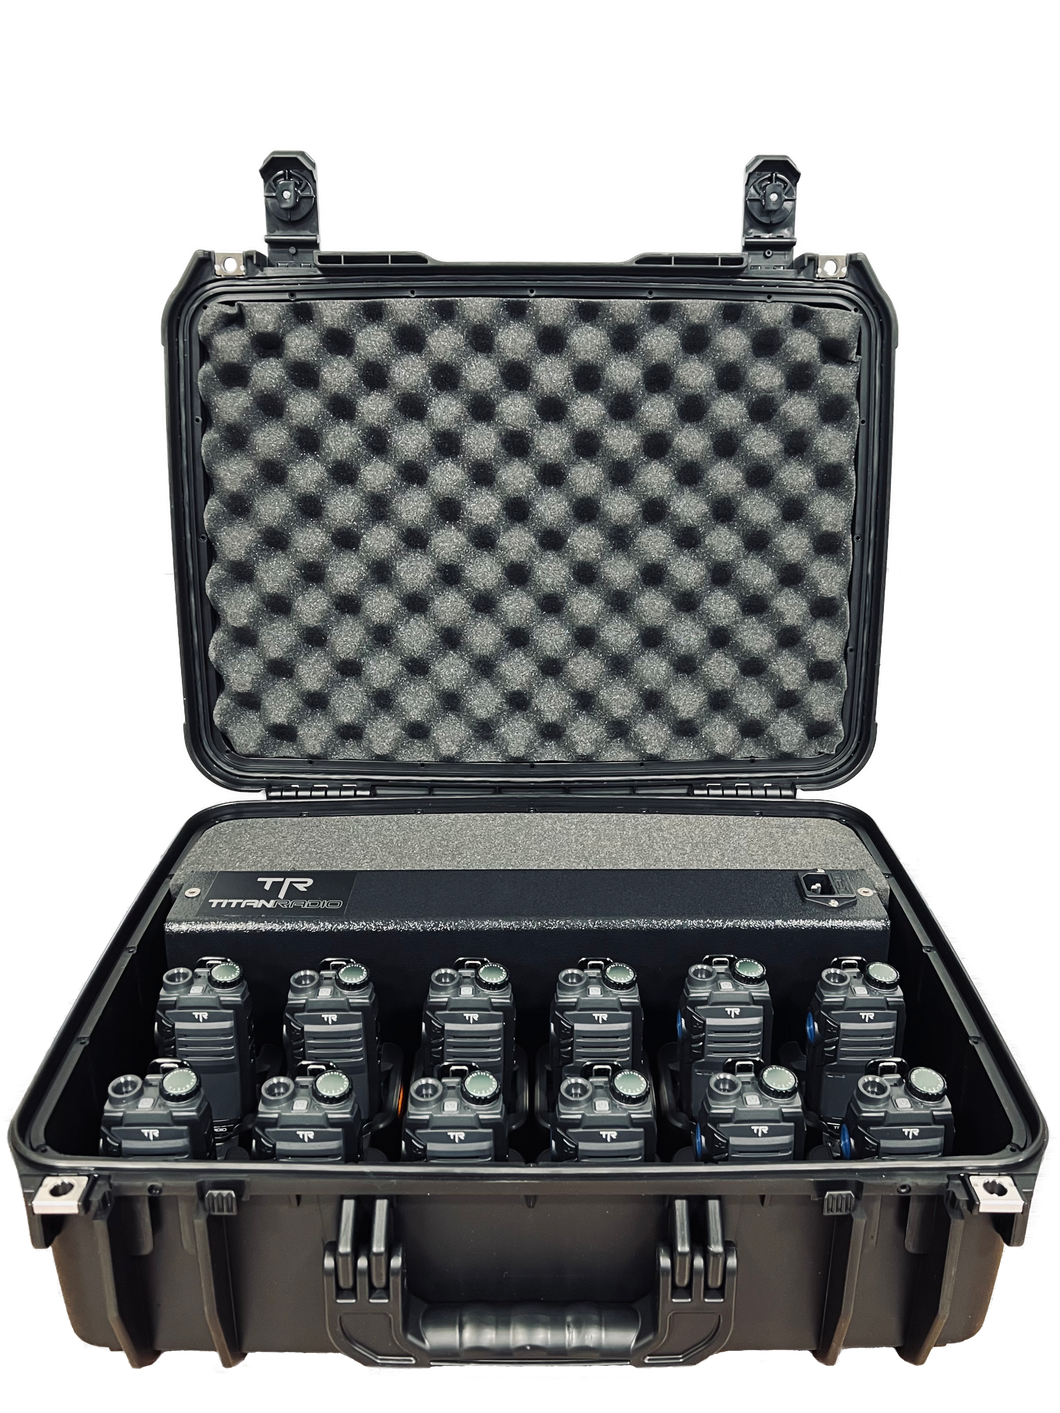 12 NEW Titan TR300 Radios + 12 Bank Charging Case (Package Deal)